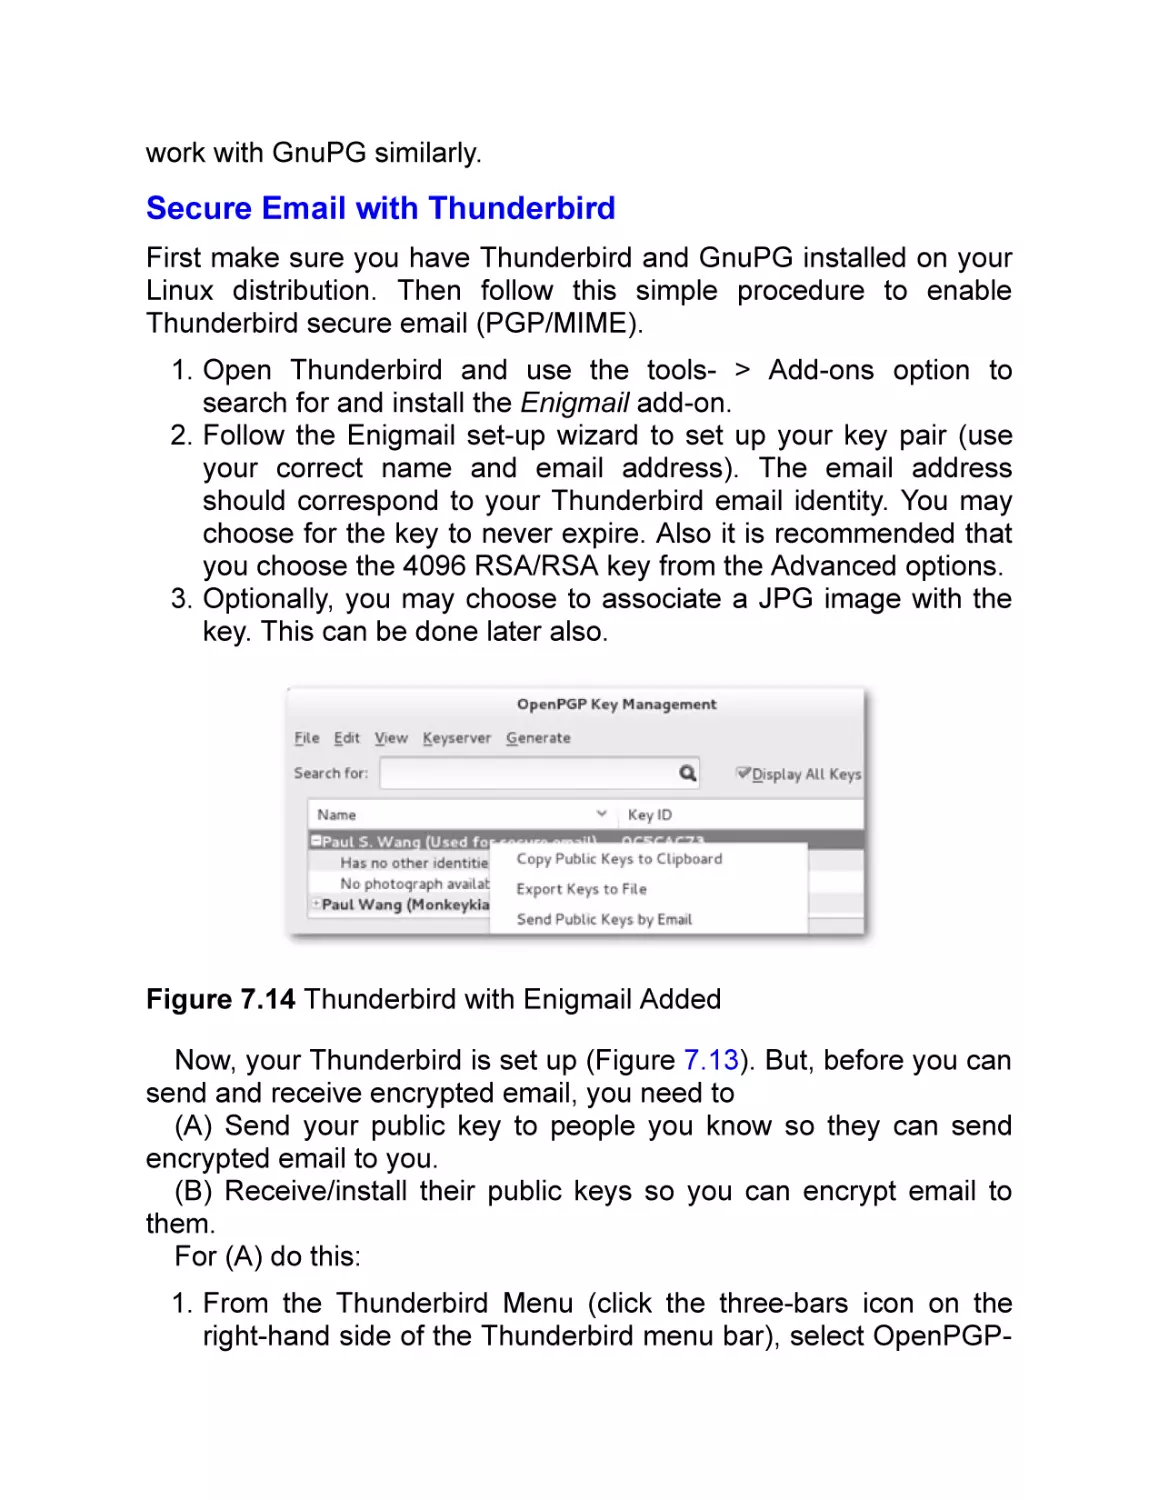 Secure Email with Thunderbird